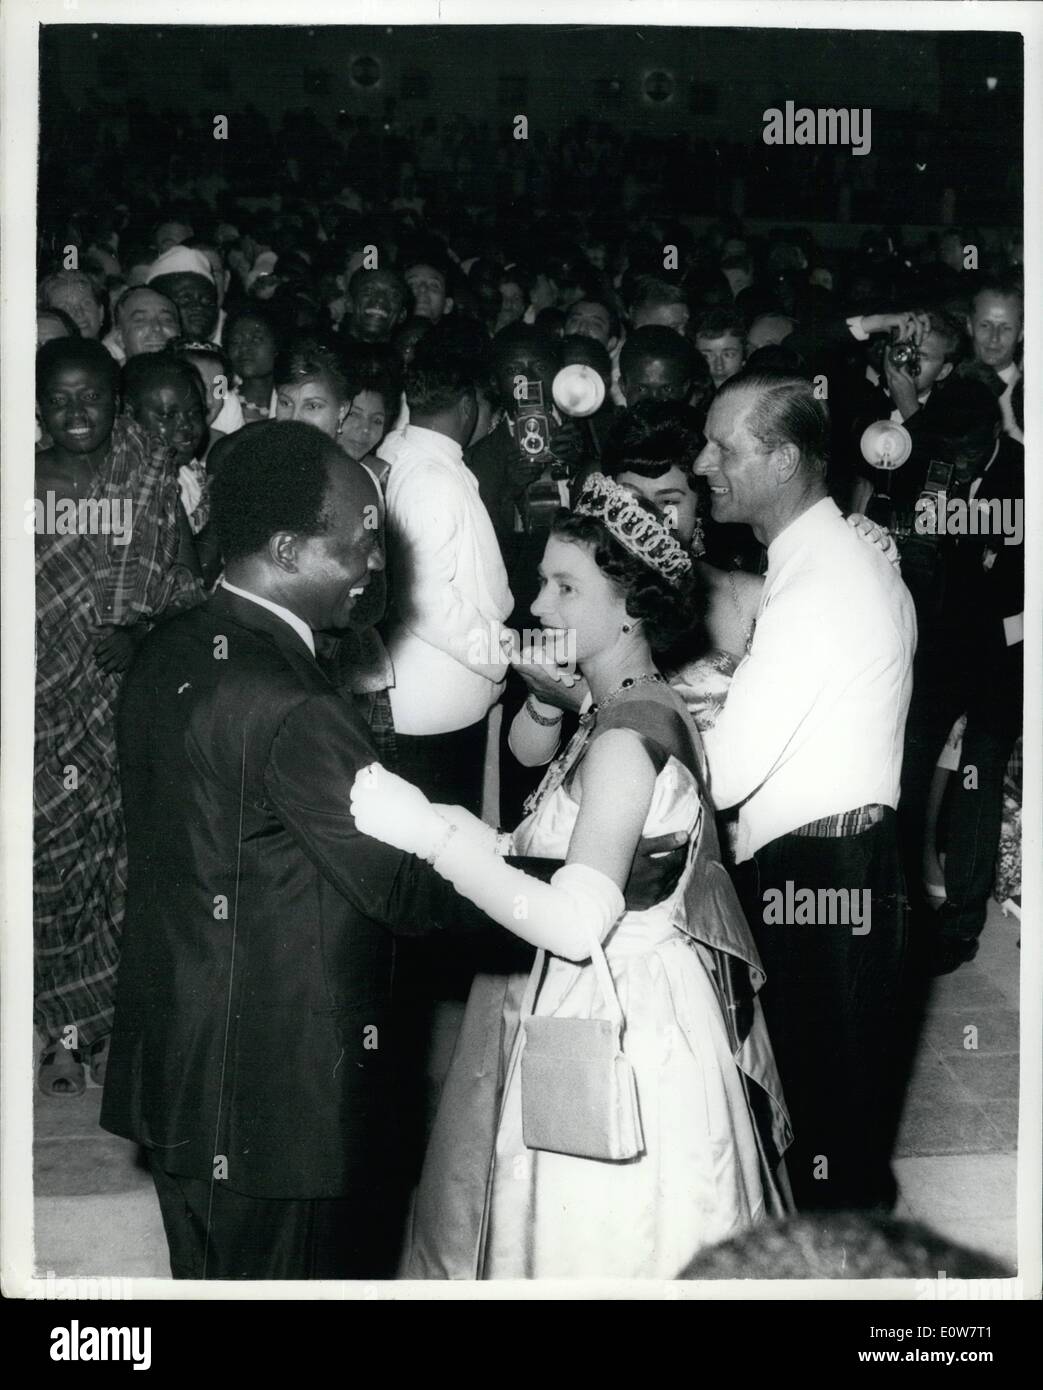 Dr. Kwame Nkrumah and Queen Elizabeth II dancing together at State Hou